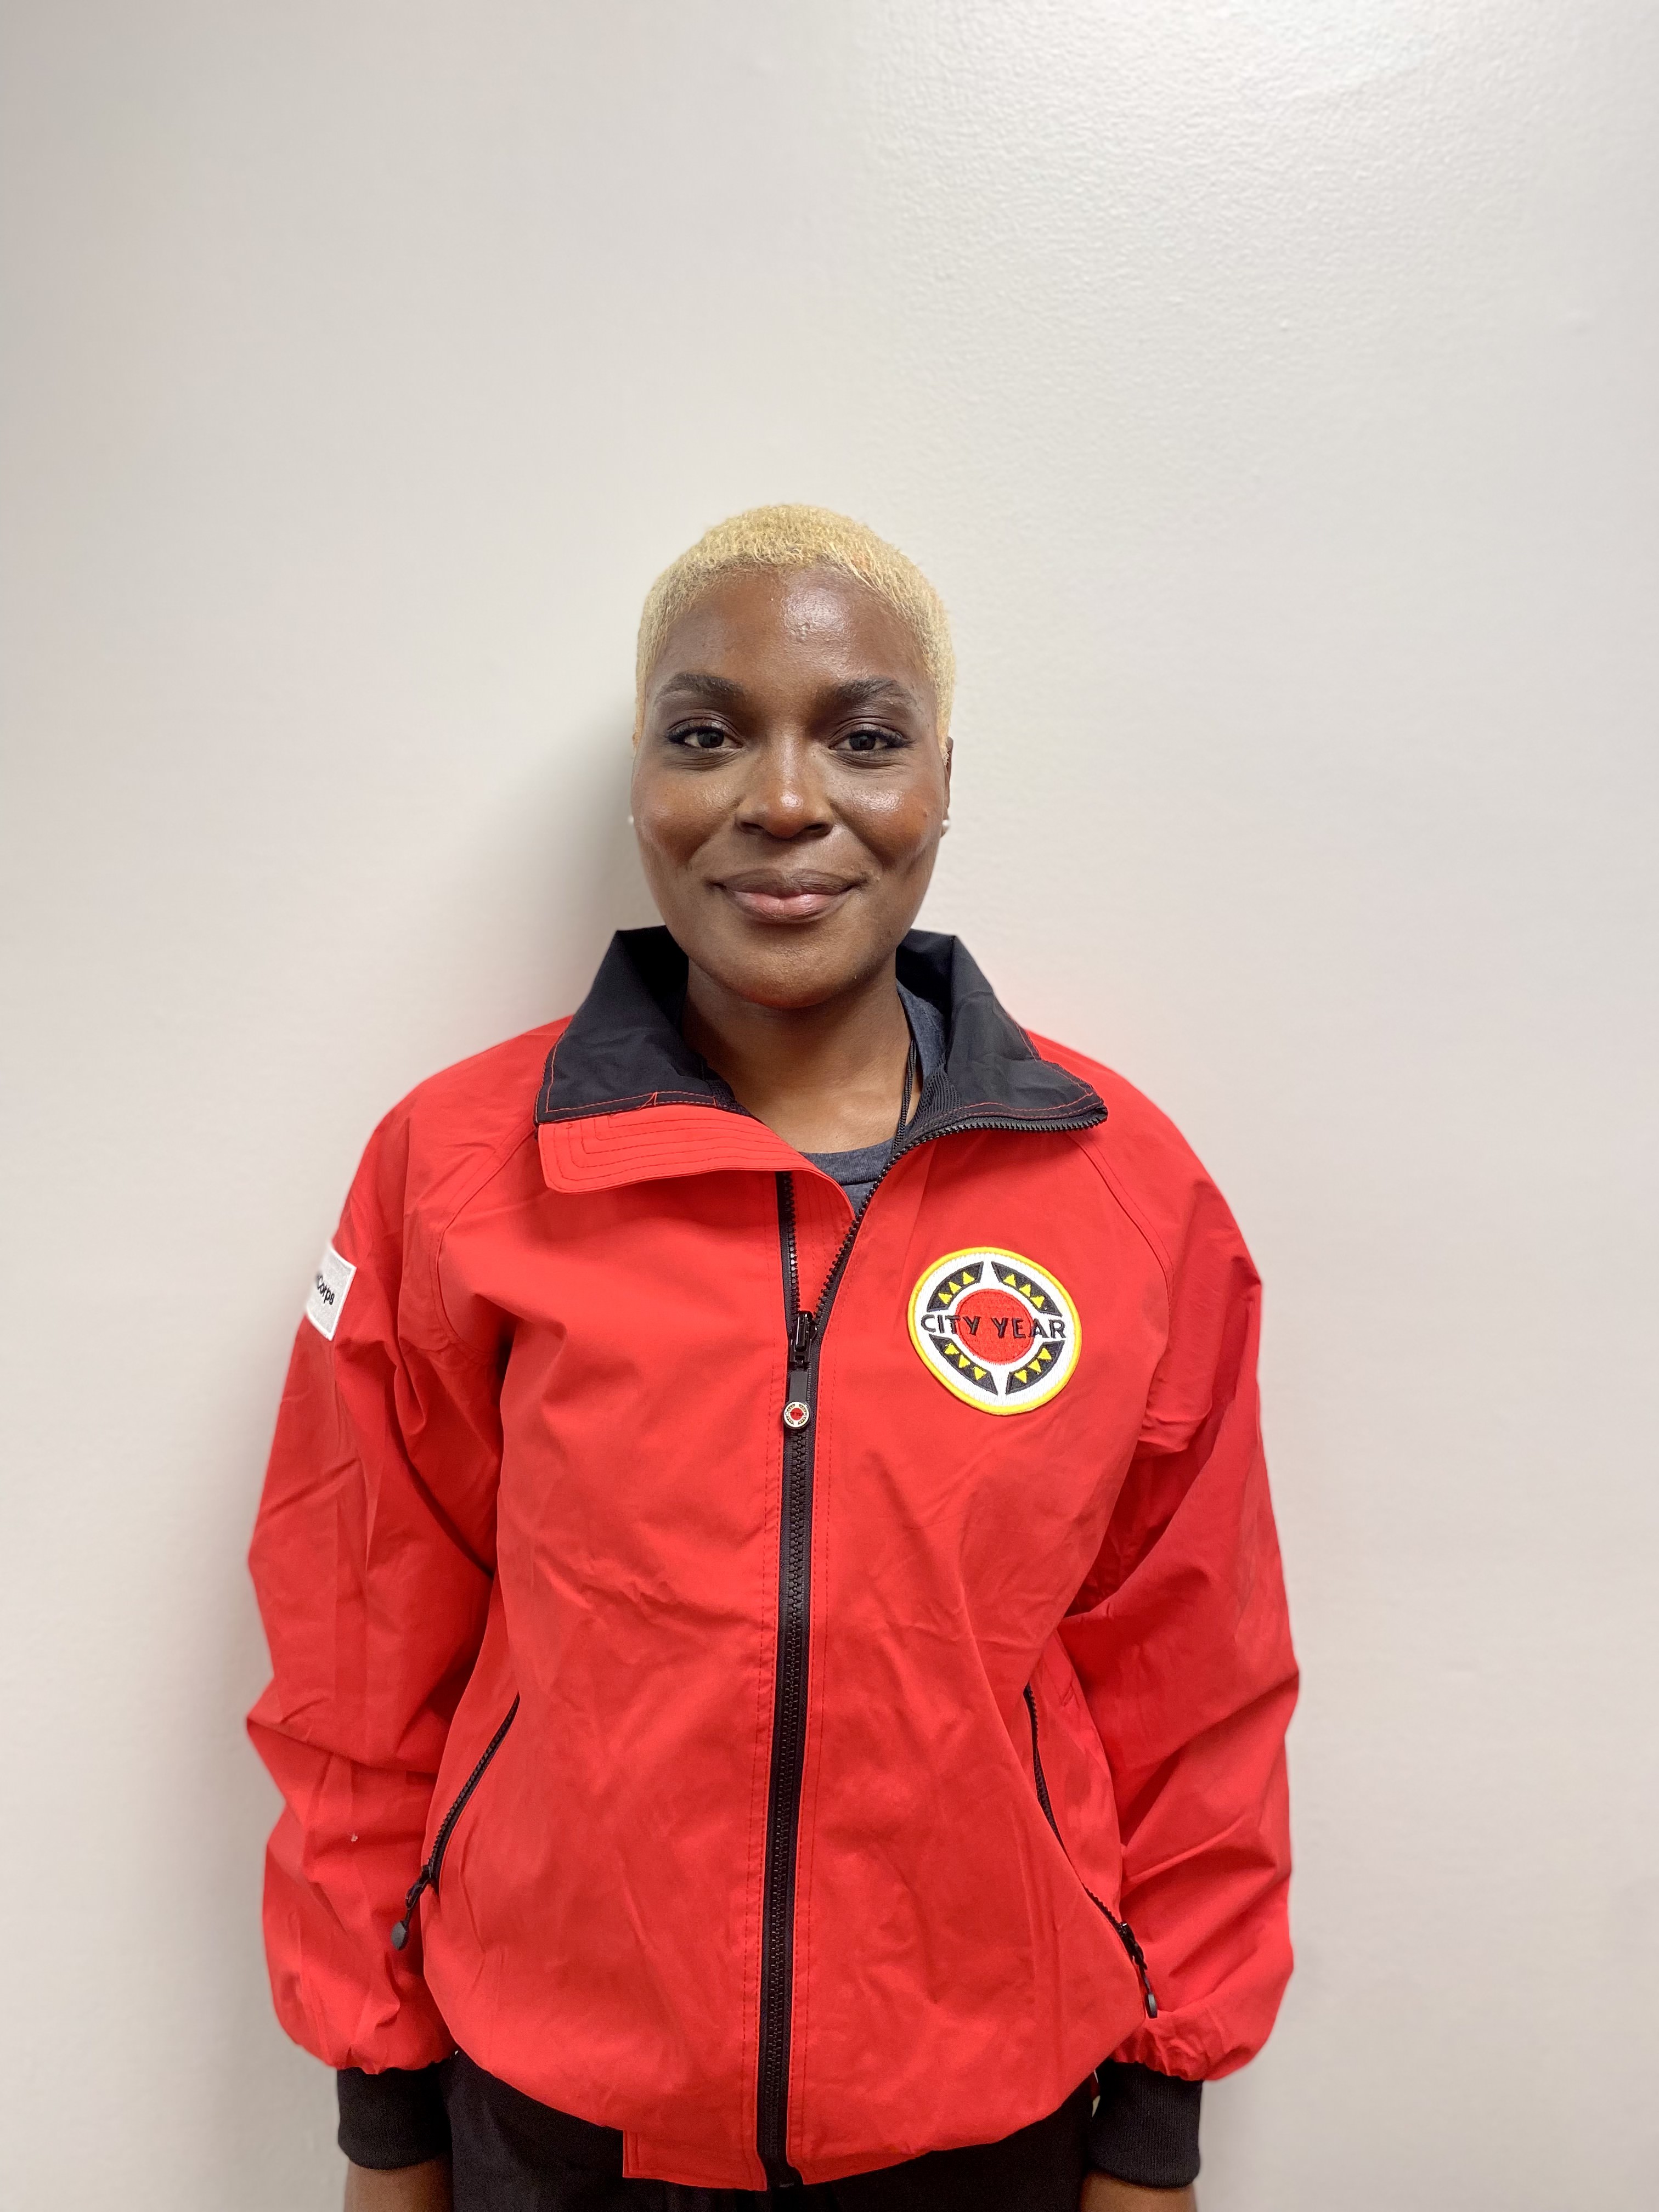 Dark-skinned woman with blond hair wearing red City Year jacket